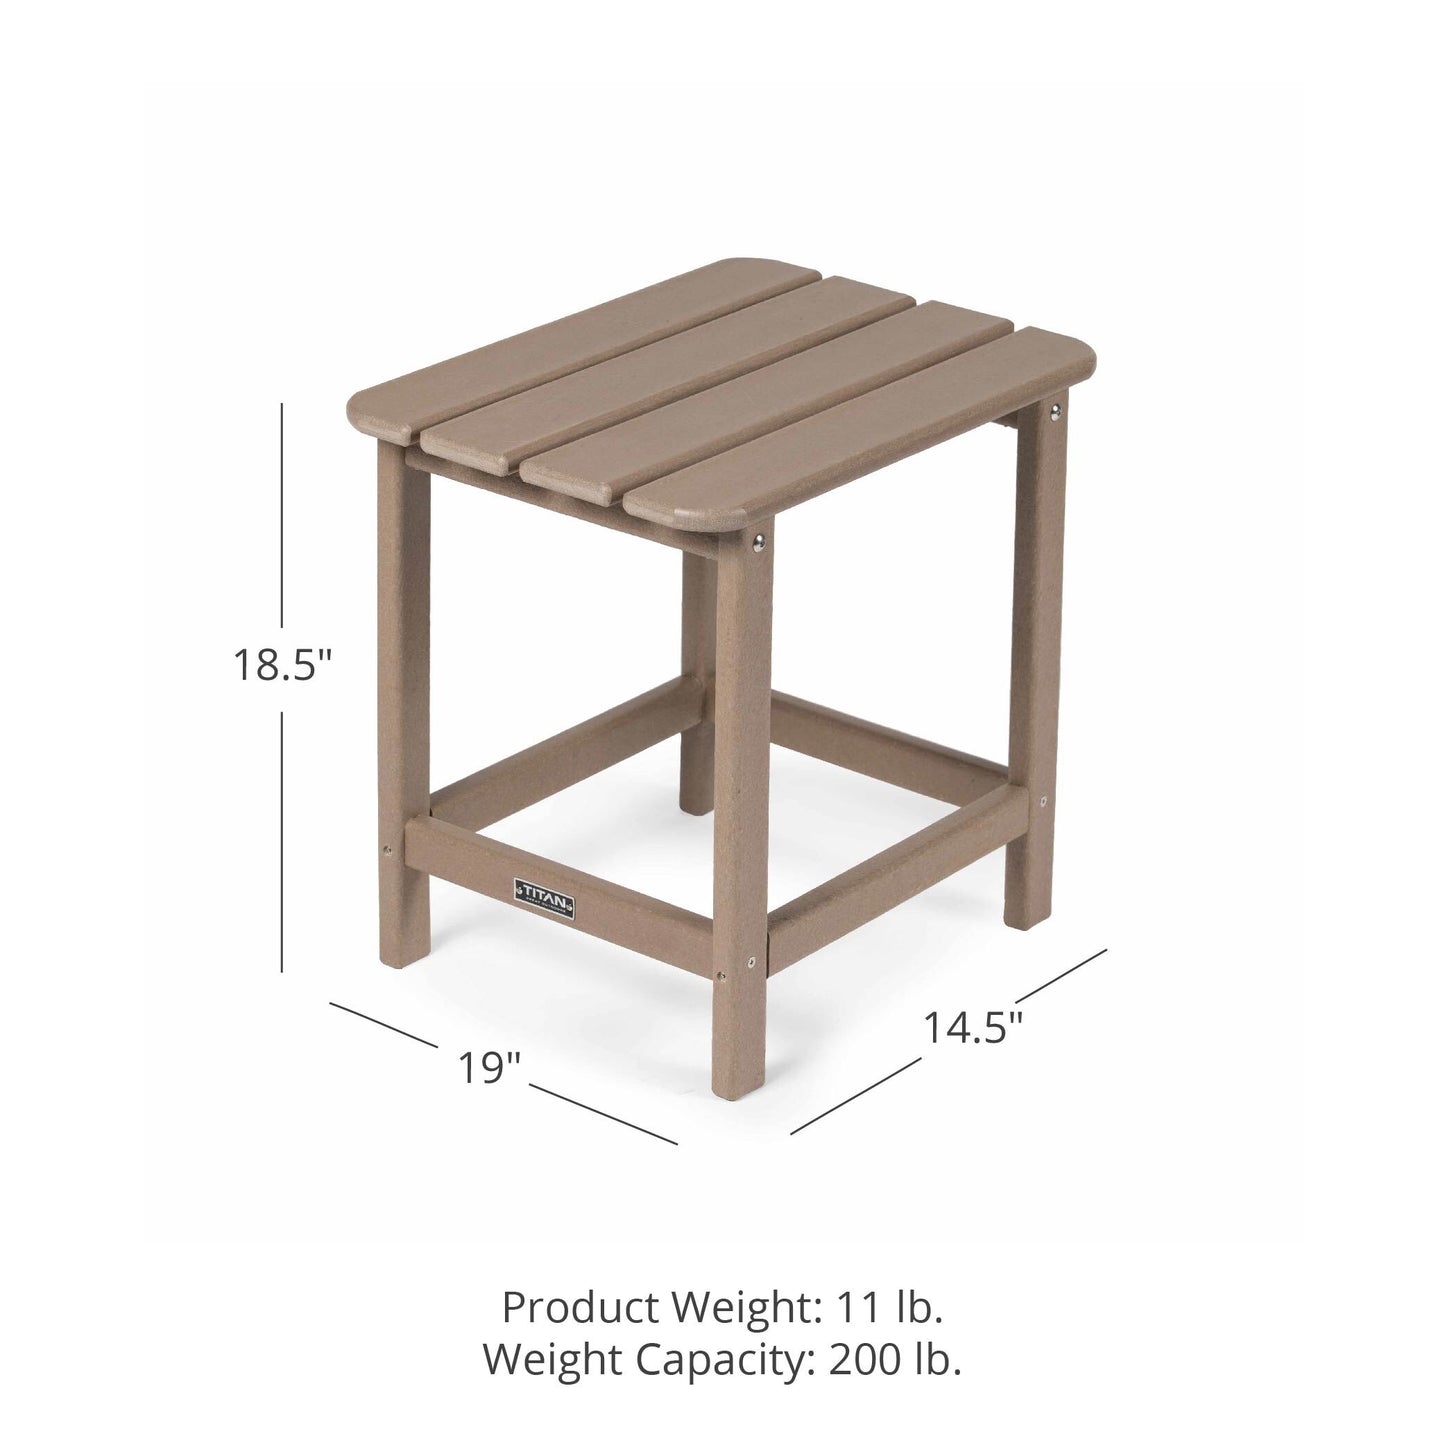 Everwood Hilltop Side Table - Table Color: Driftwood | Driftwood - view 8